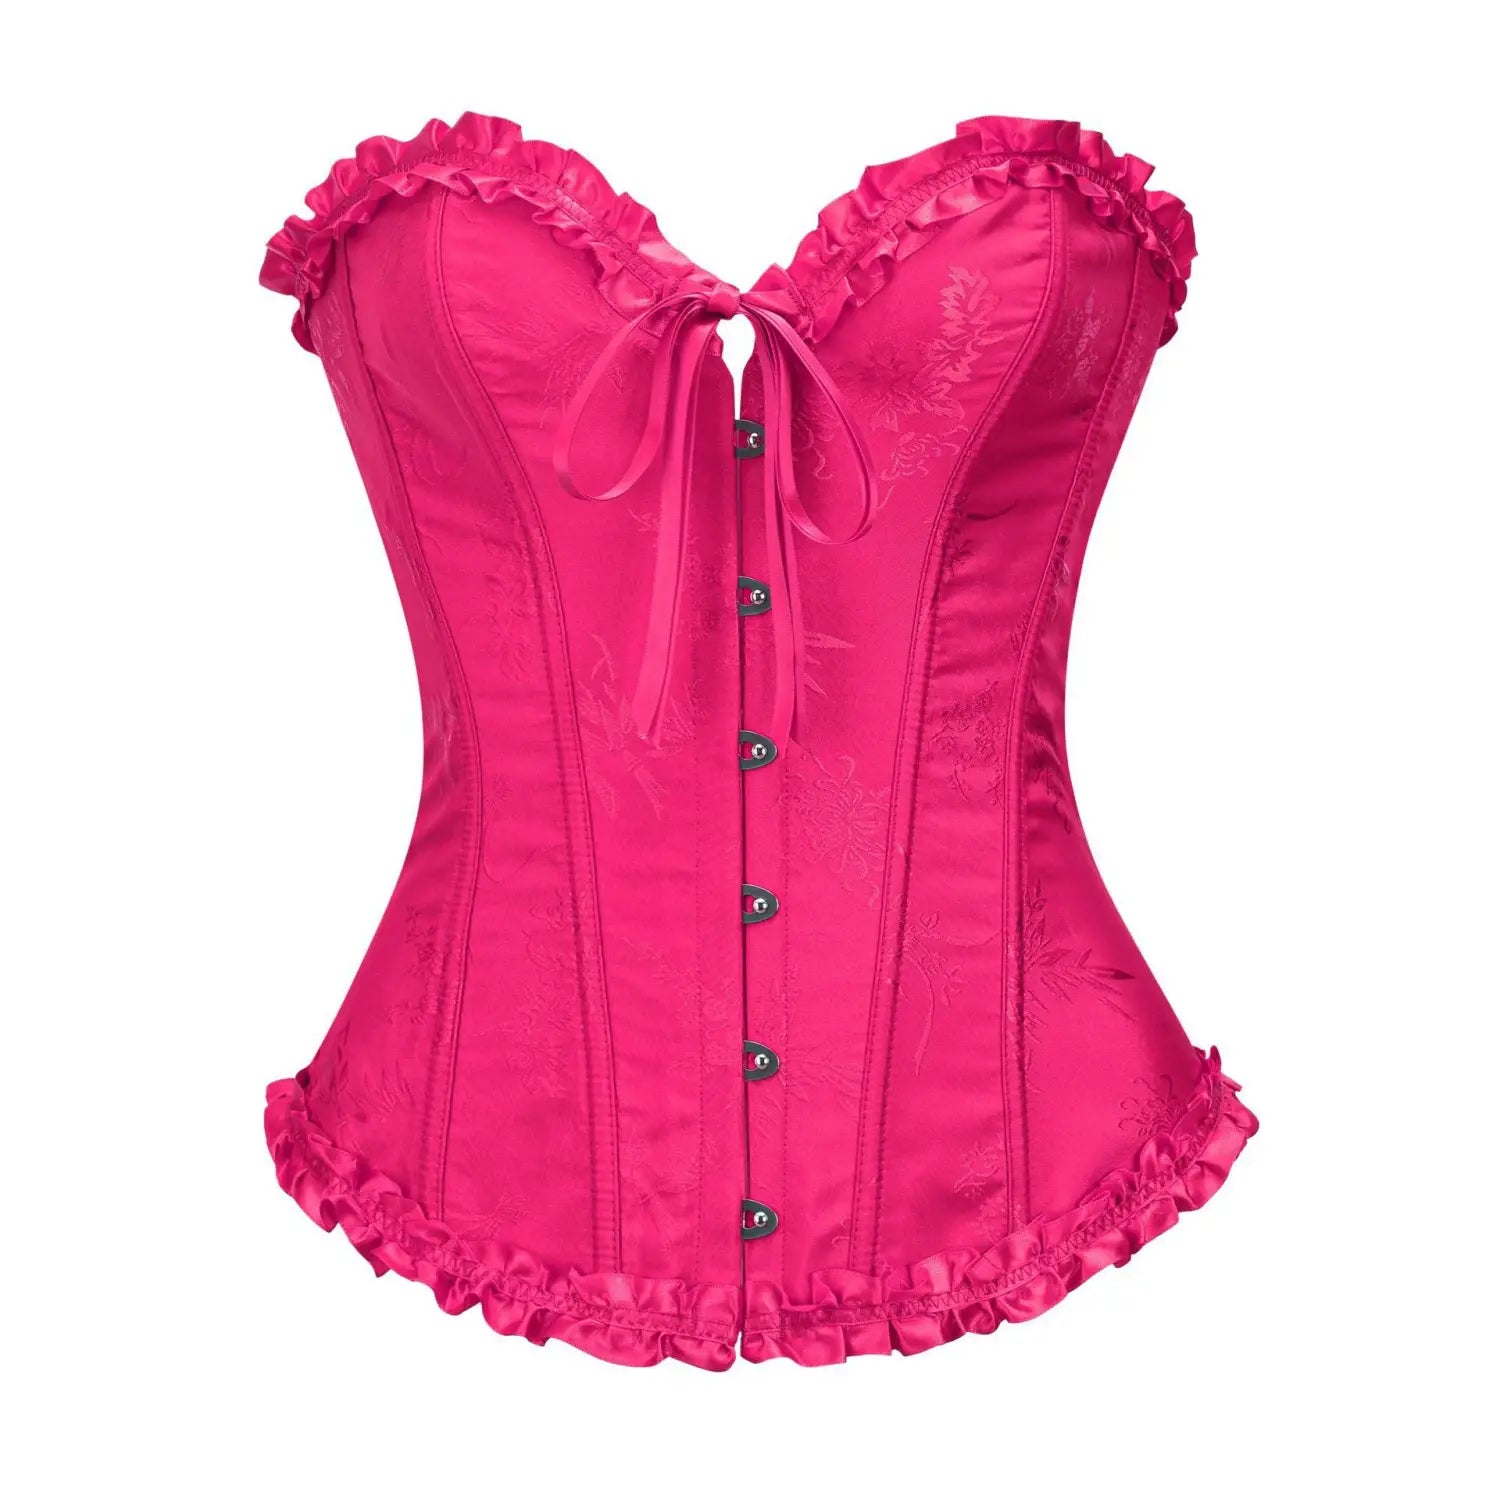 Beautiful Push Up Lace Corset With Ribbon Tie And Frills